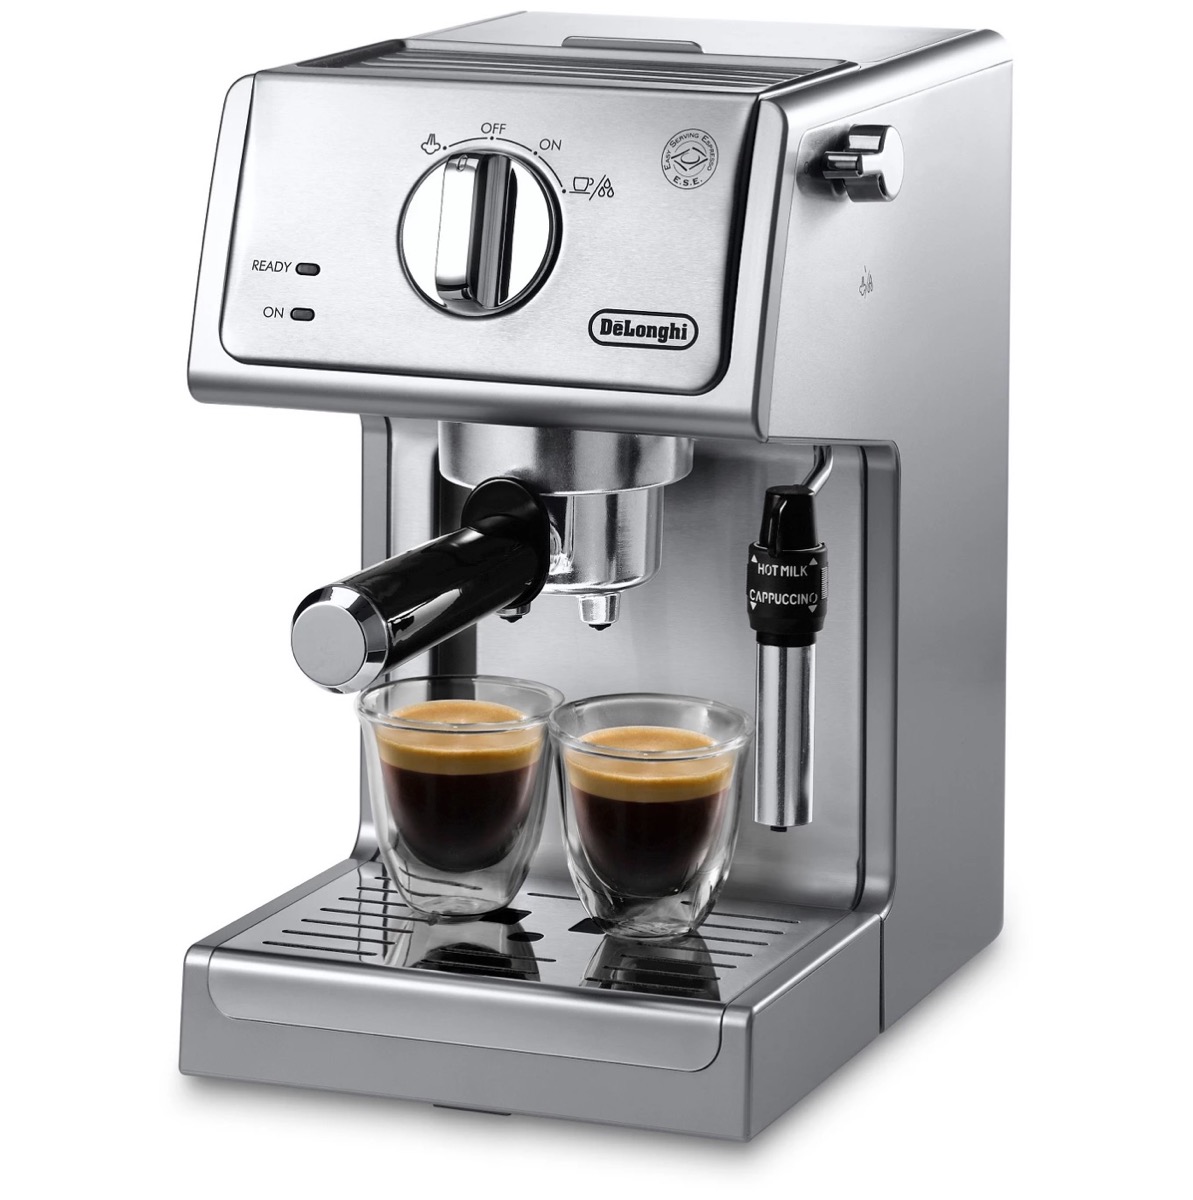 Delonghi Coffee Maker Mother's Day Gifts